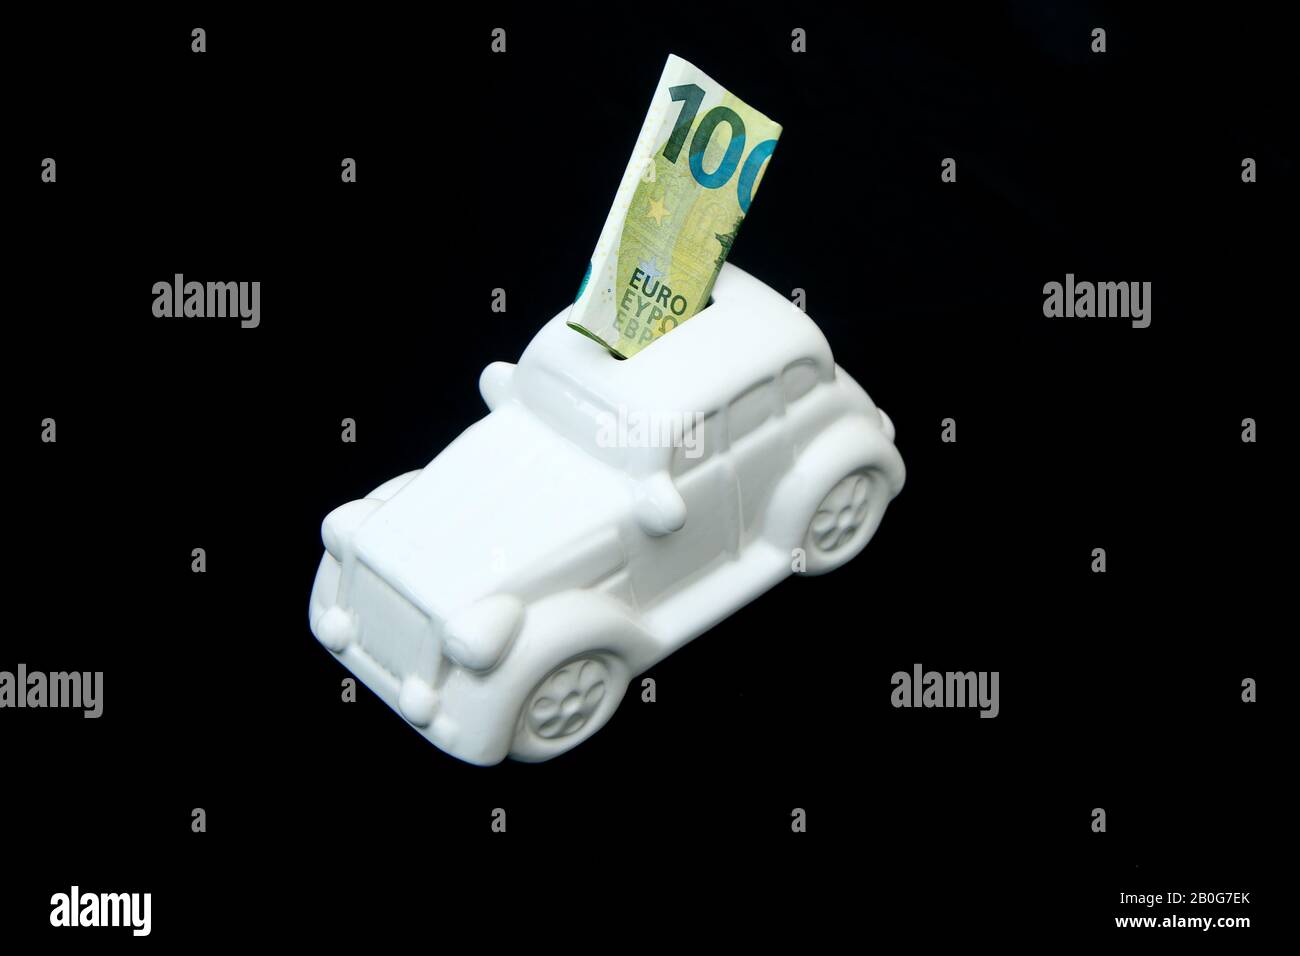 The ceramic car shaped money box with a banknote inside. It can be symbol for costs for car´s repairs, investment, savings or insurance. Stock Photo